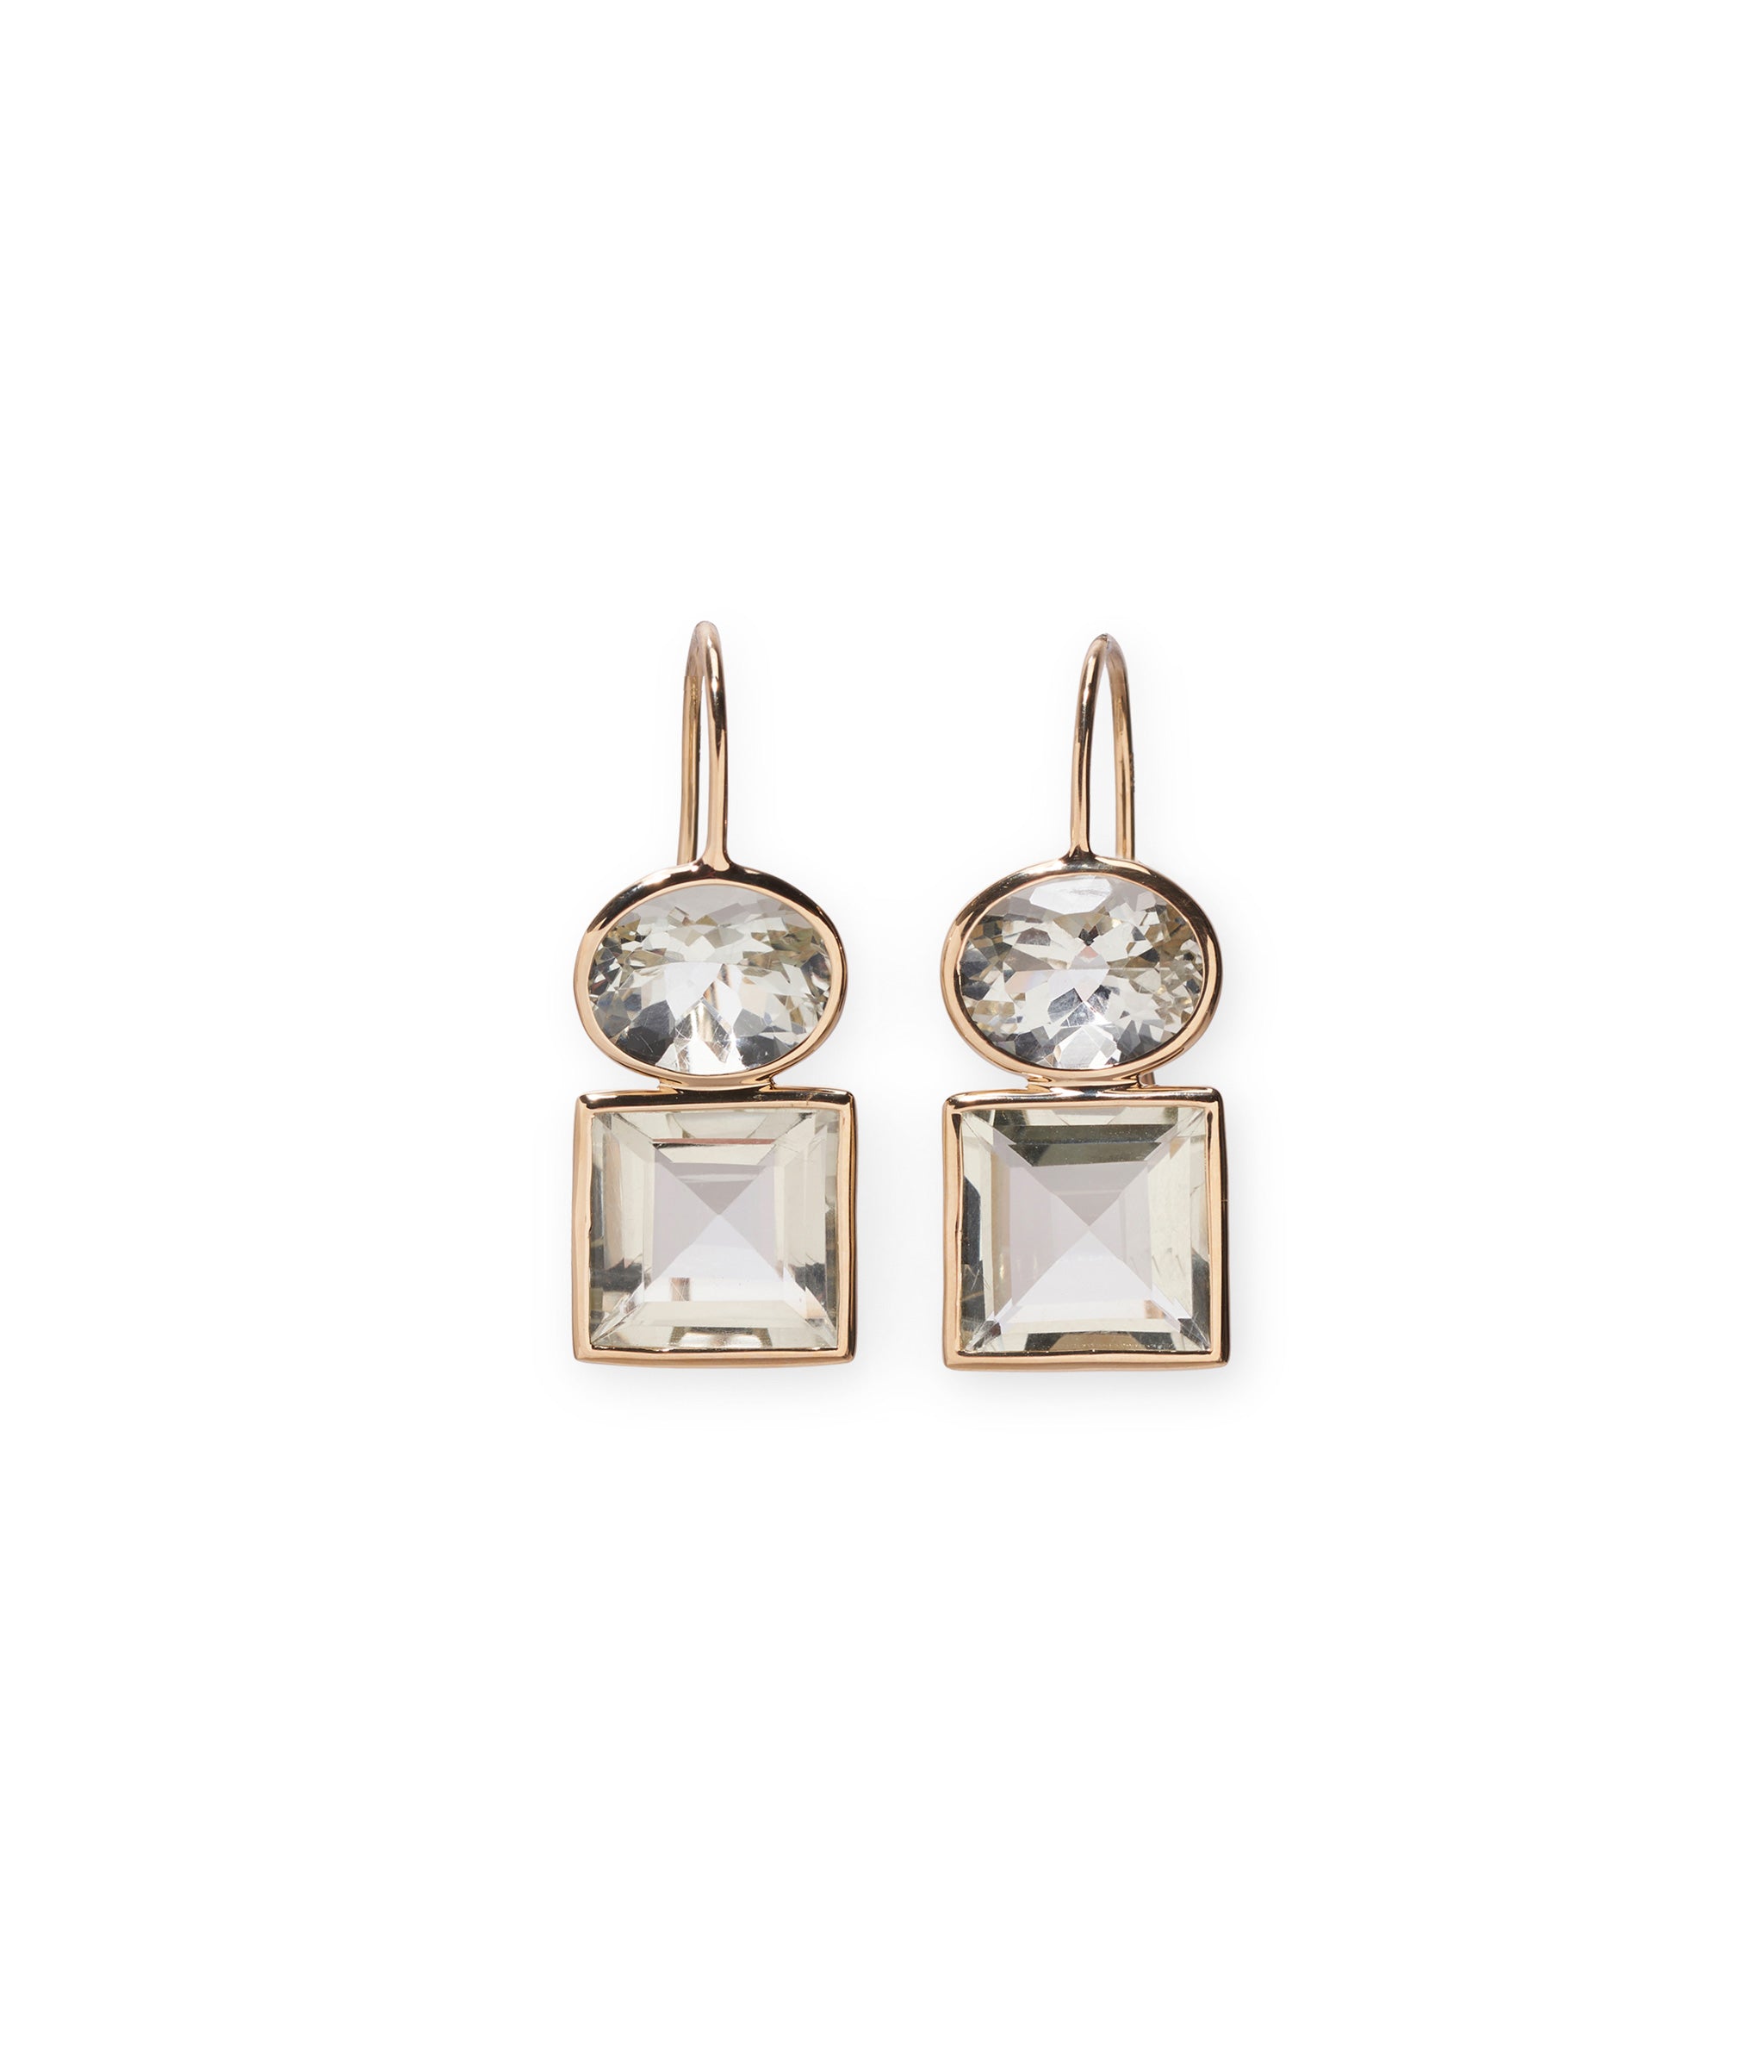 14k Duo Earrings in Green Amethyst. Fine gold earwires with faceted oval and square light green amethyst stones.